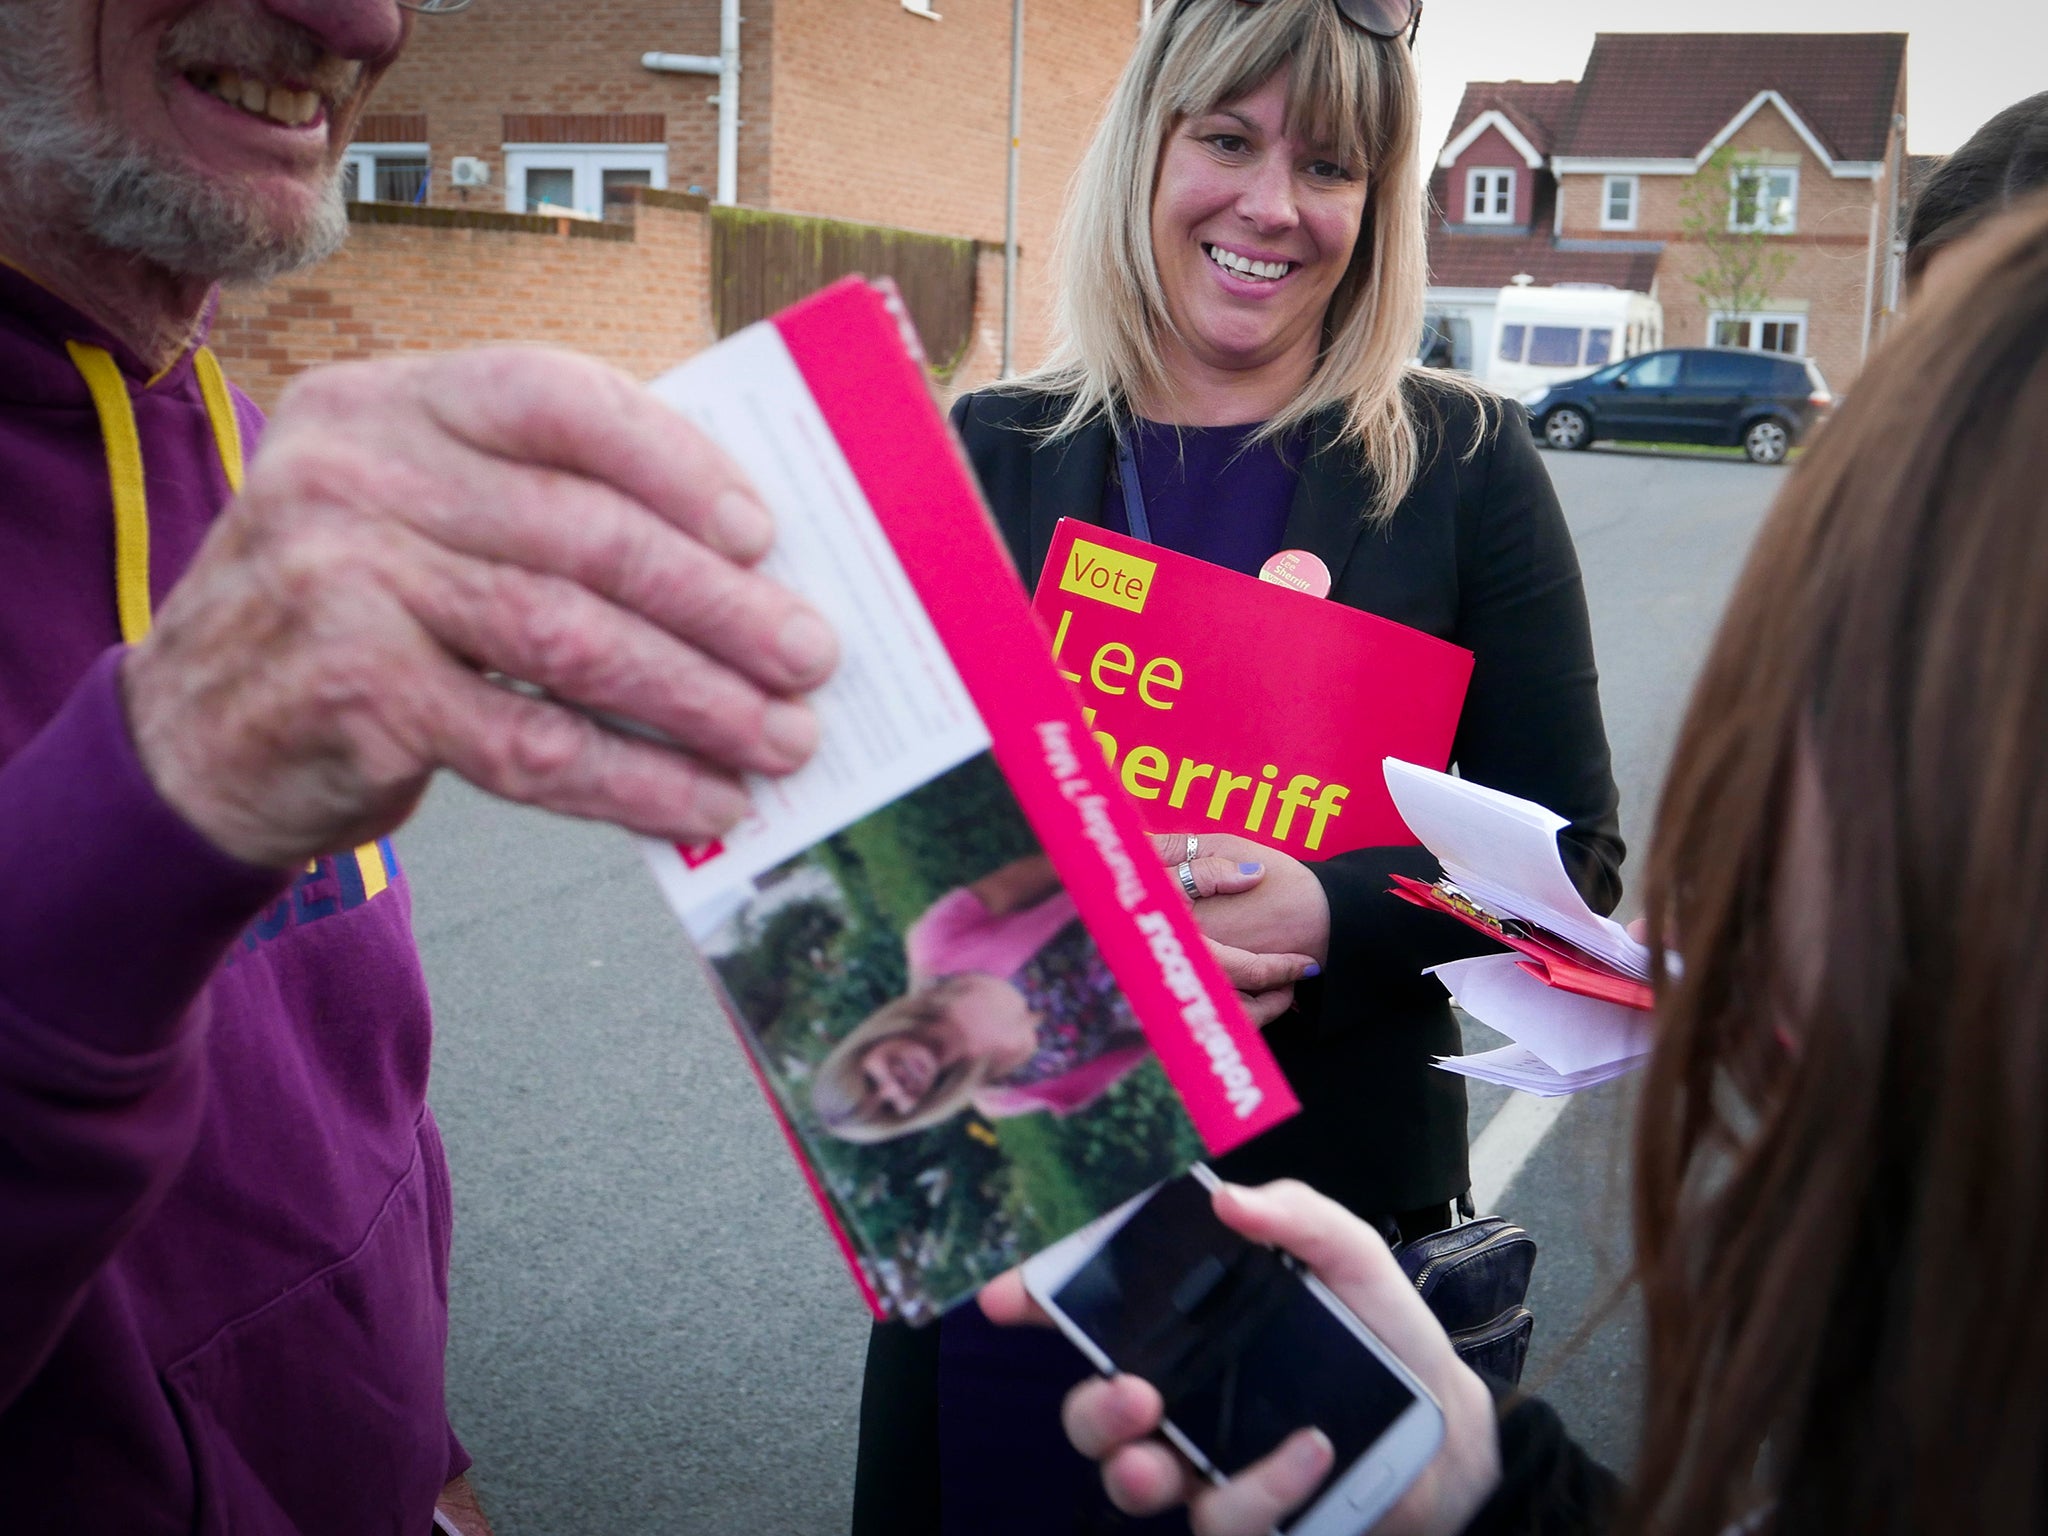 All smiles: Labour candidate Lee Sherriff on the campaign trail